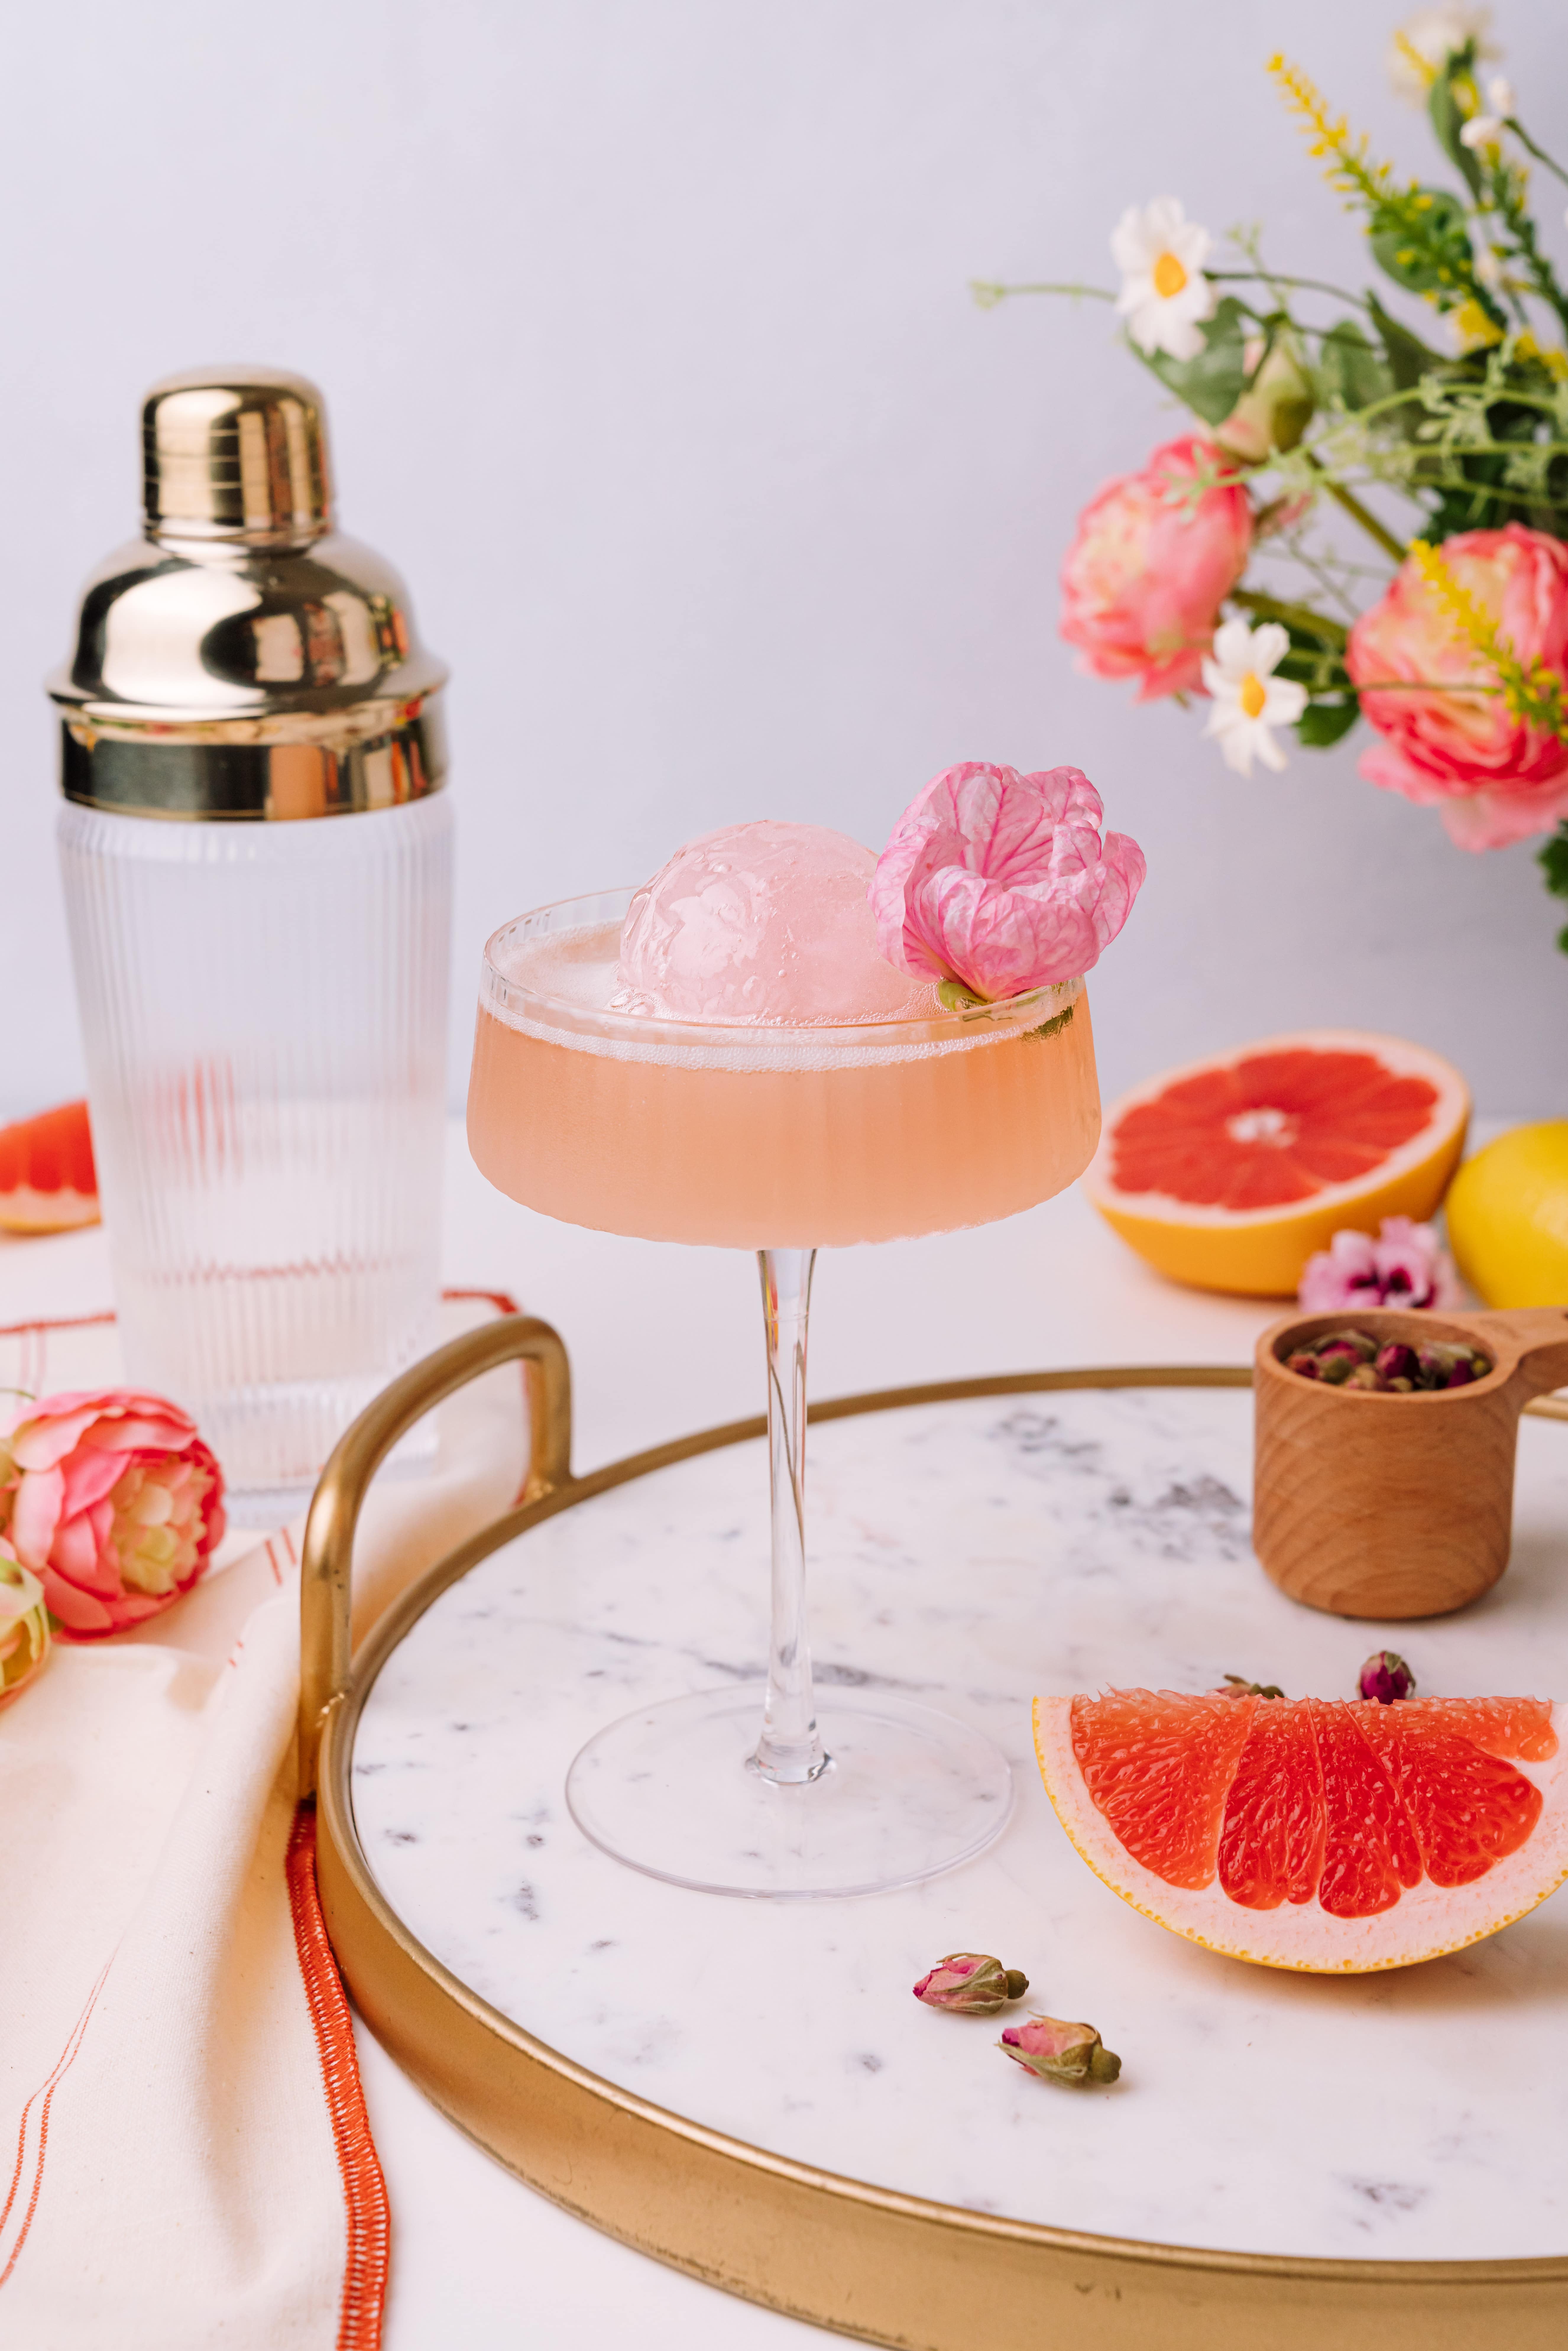 Exciting Cocktails with Edible Flowers!